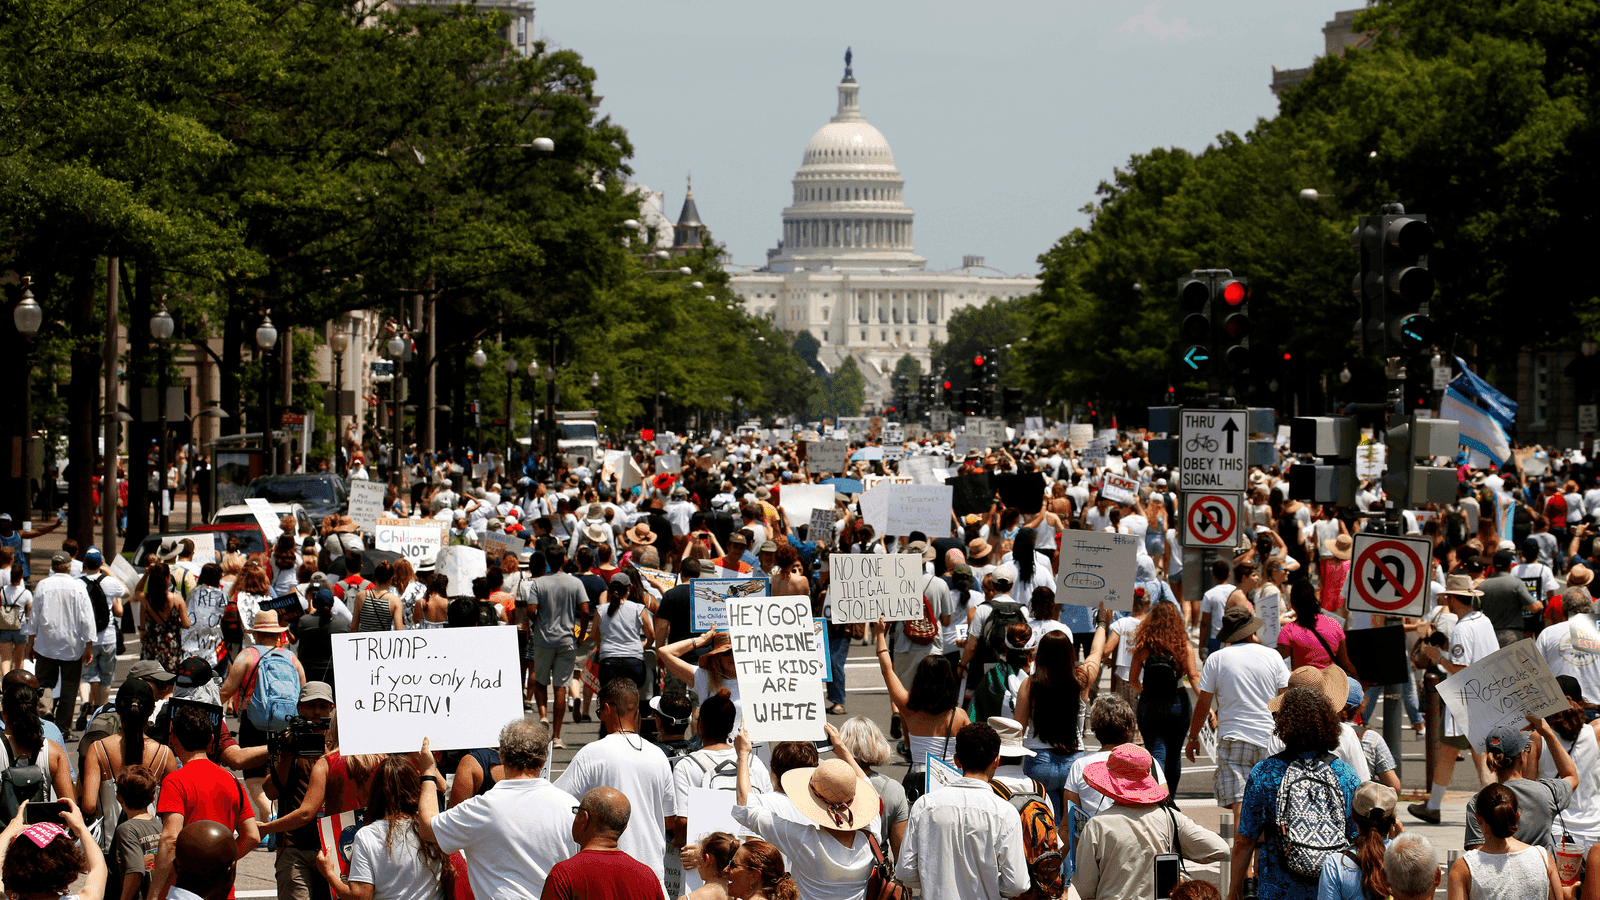 protesters march in washington, dc, to protest Trump's immigration policies